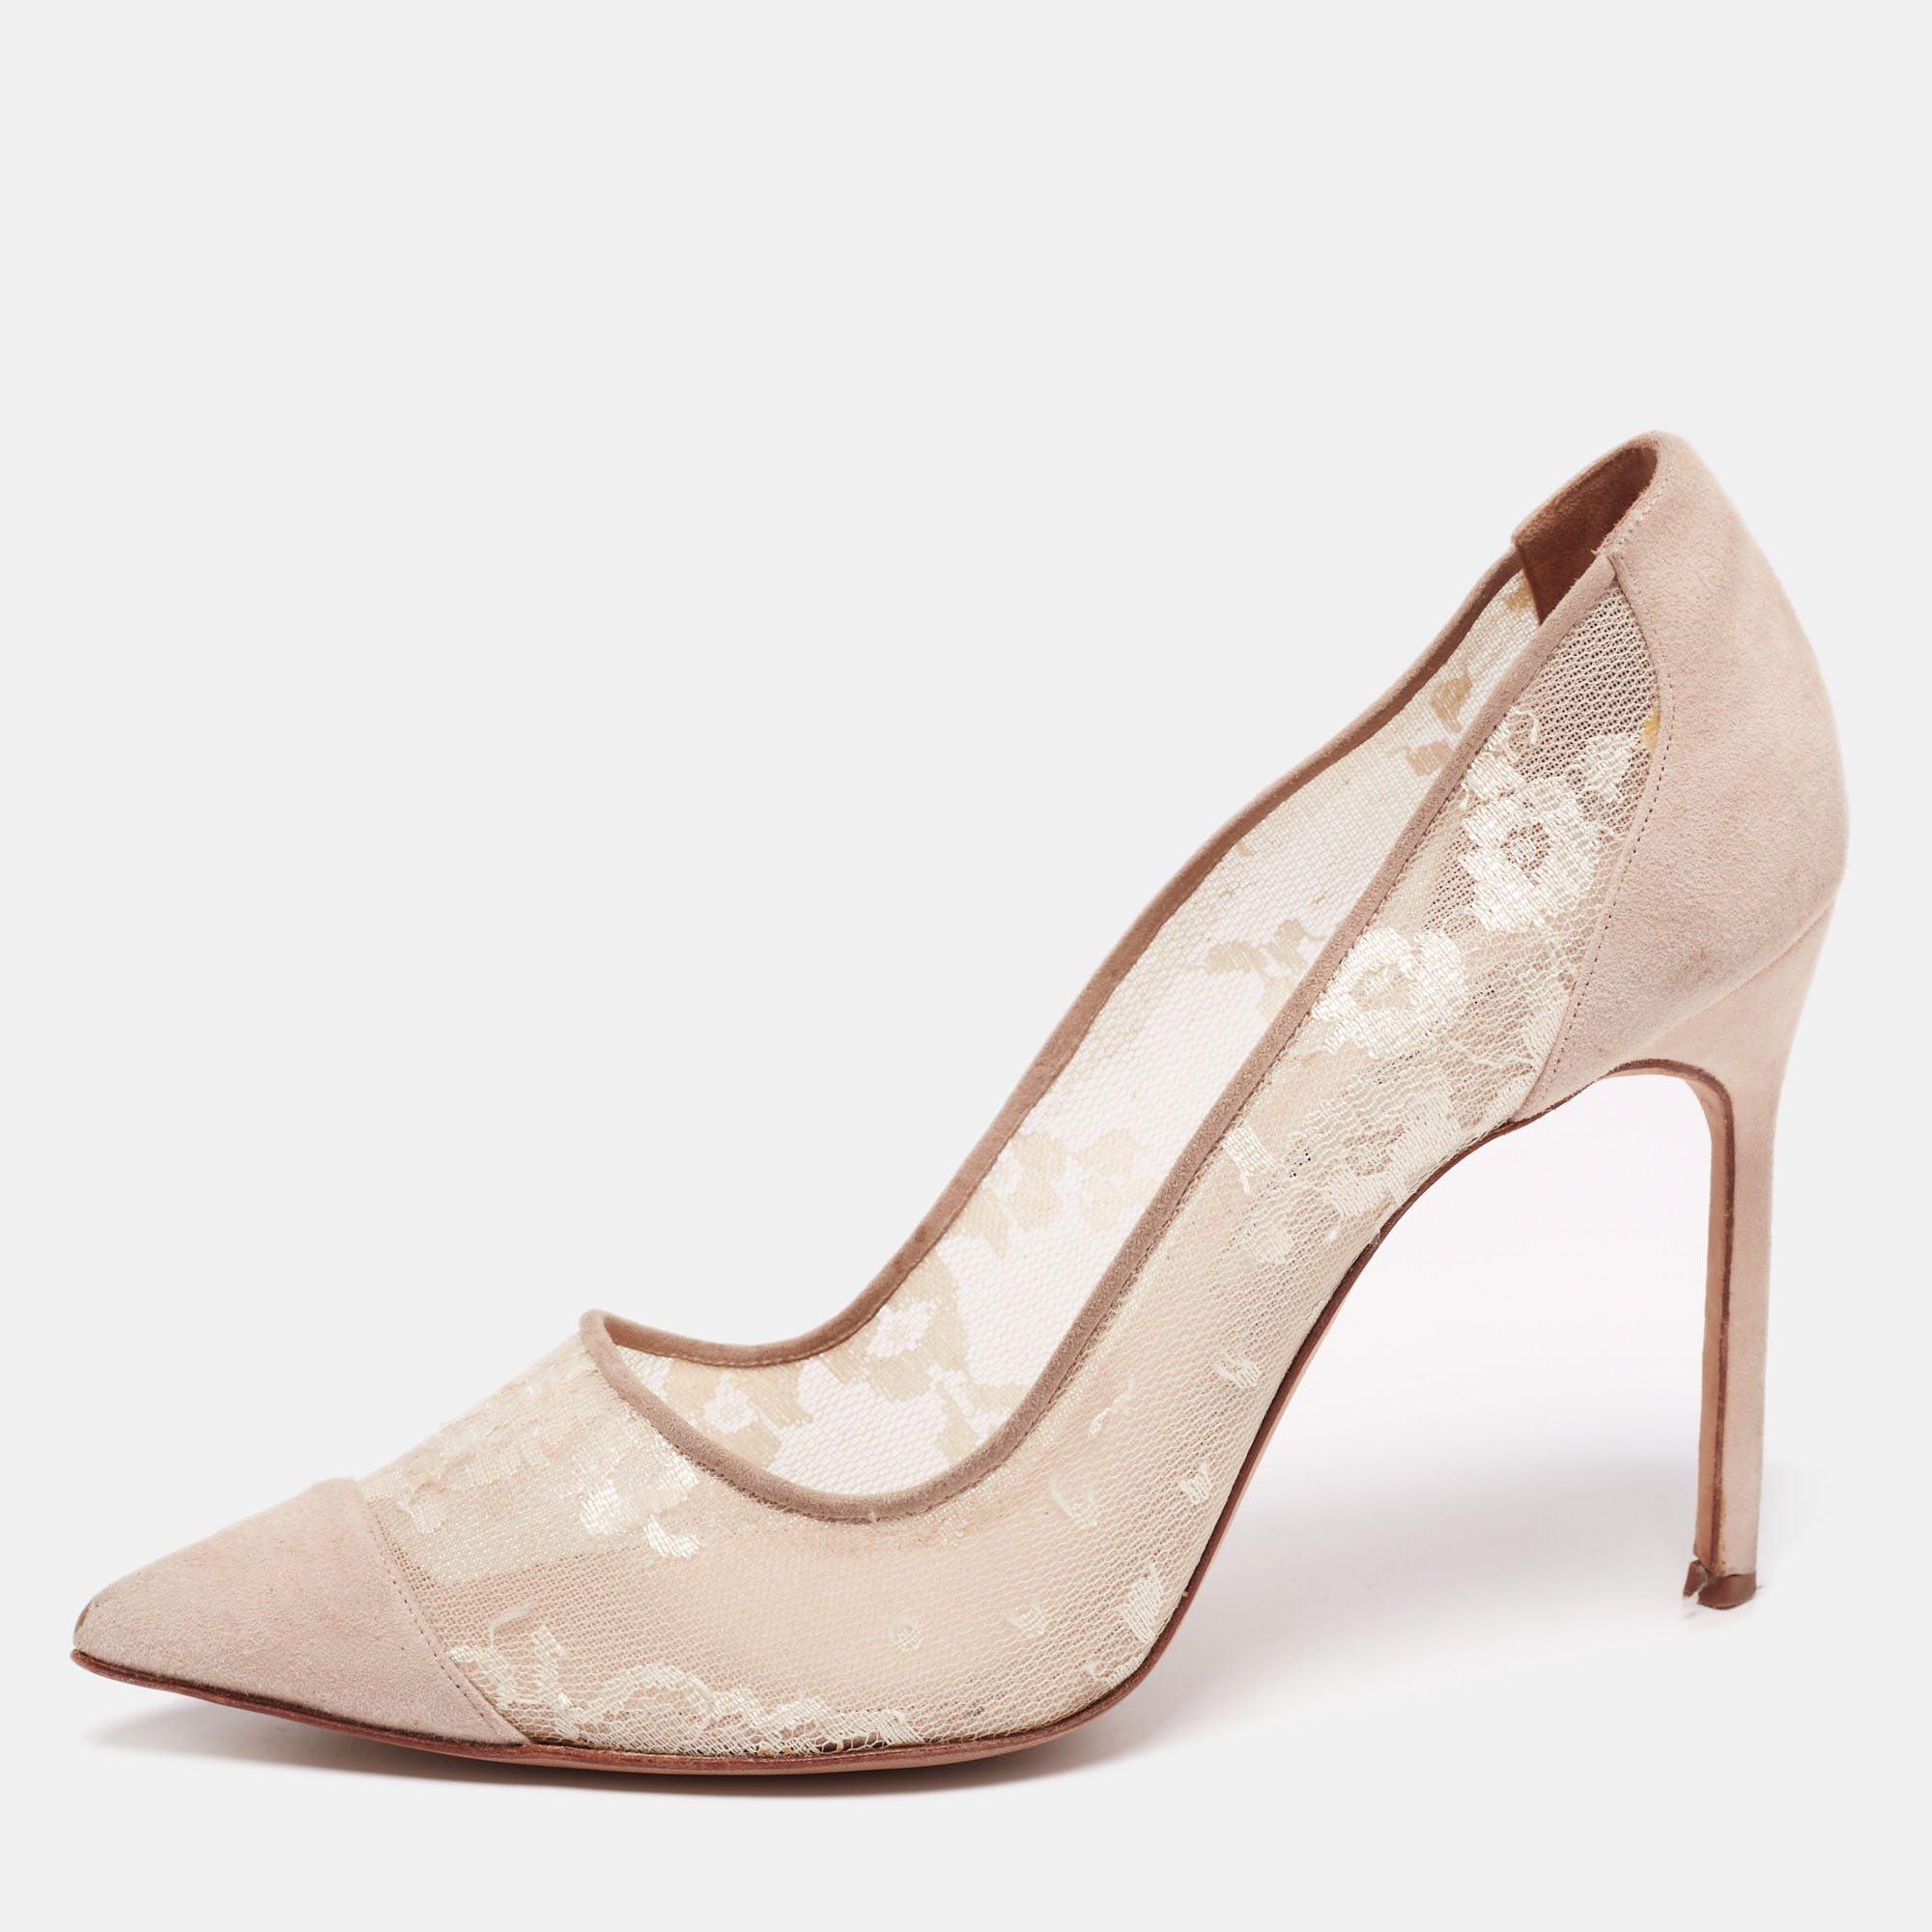 Manolo blahnik beige suede and lace pointed-toe pumps size 40